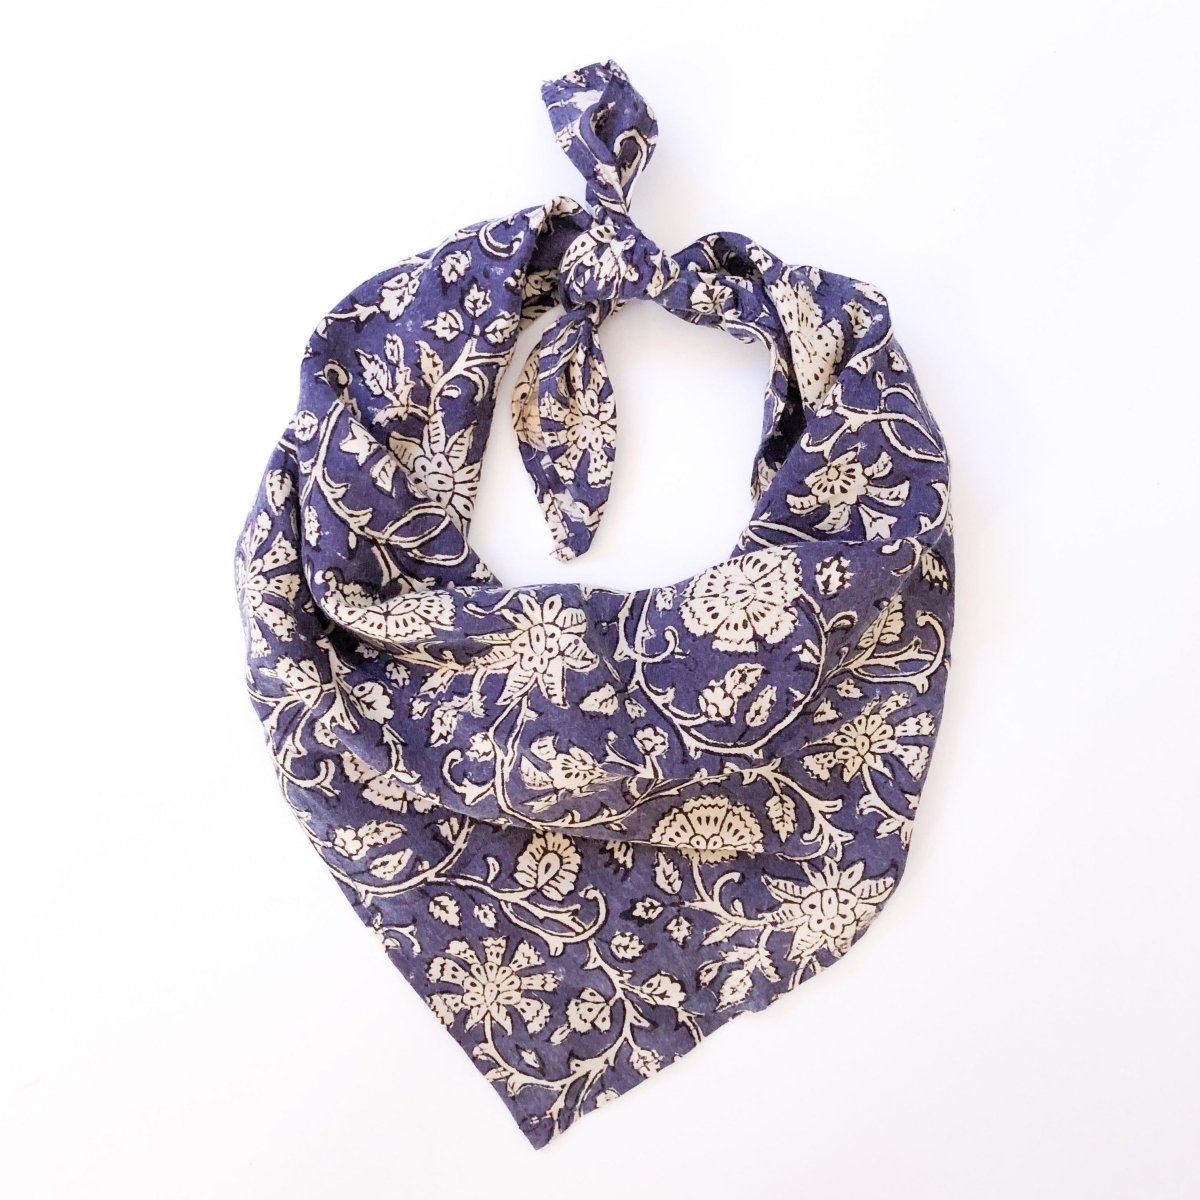 A violet and cream floral patterned bandana, folded over and tied in a knot. Block printed by hand, the Alma Bandana from Maelu is designed in Portland, Oregon and handmade in India.